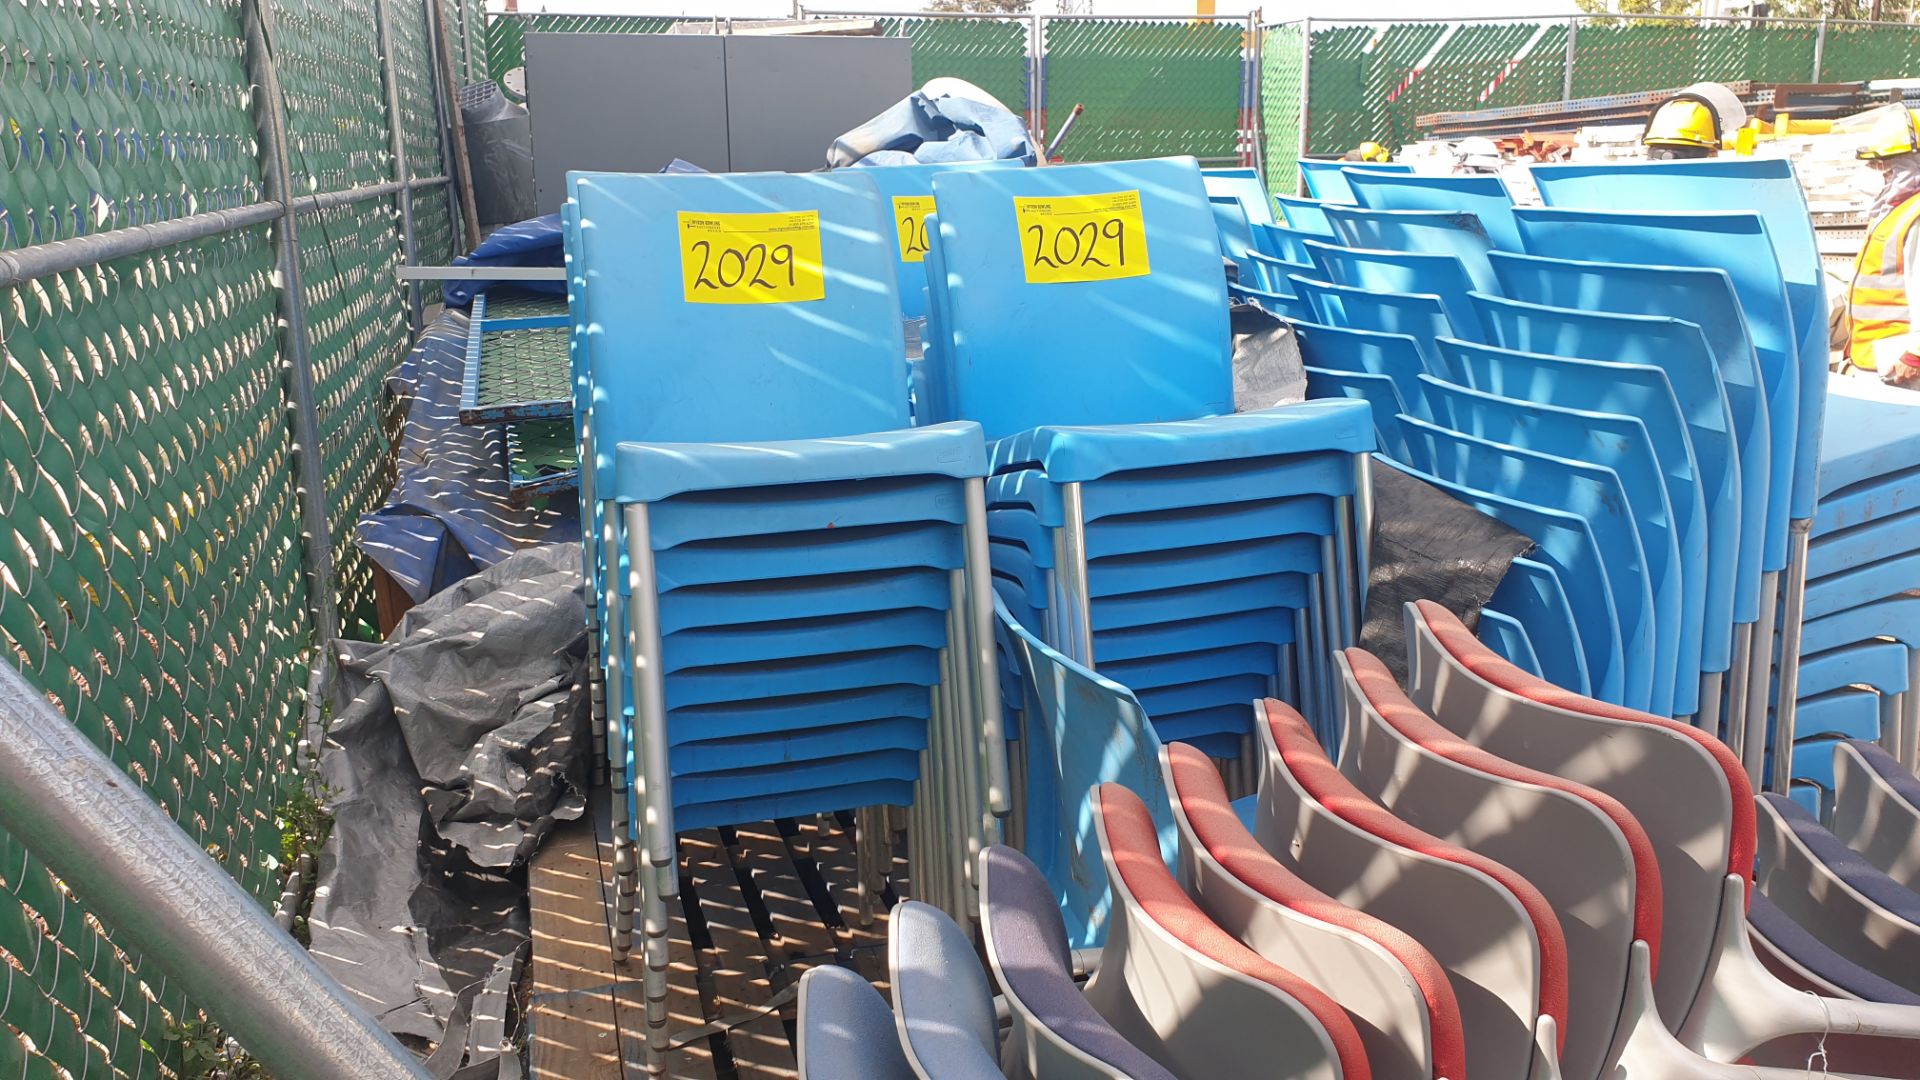 1 Lote of 40 blue plastic chairs, 7 metal chairs for office with backrest and upholstered seat - Bild 6 aus 22